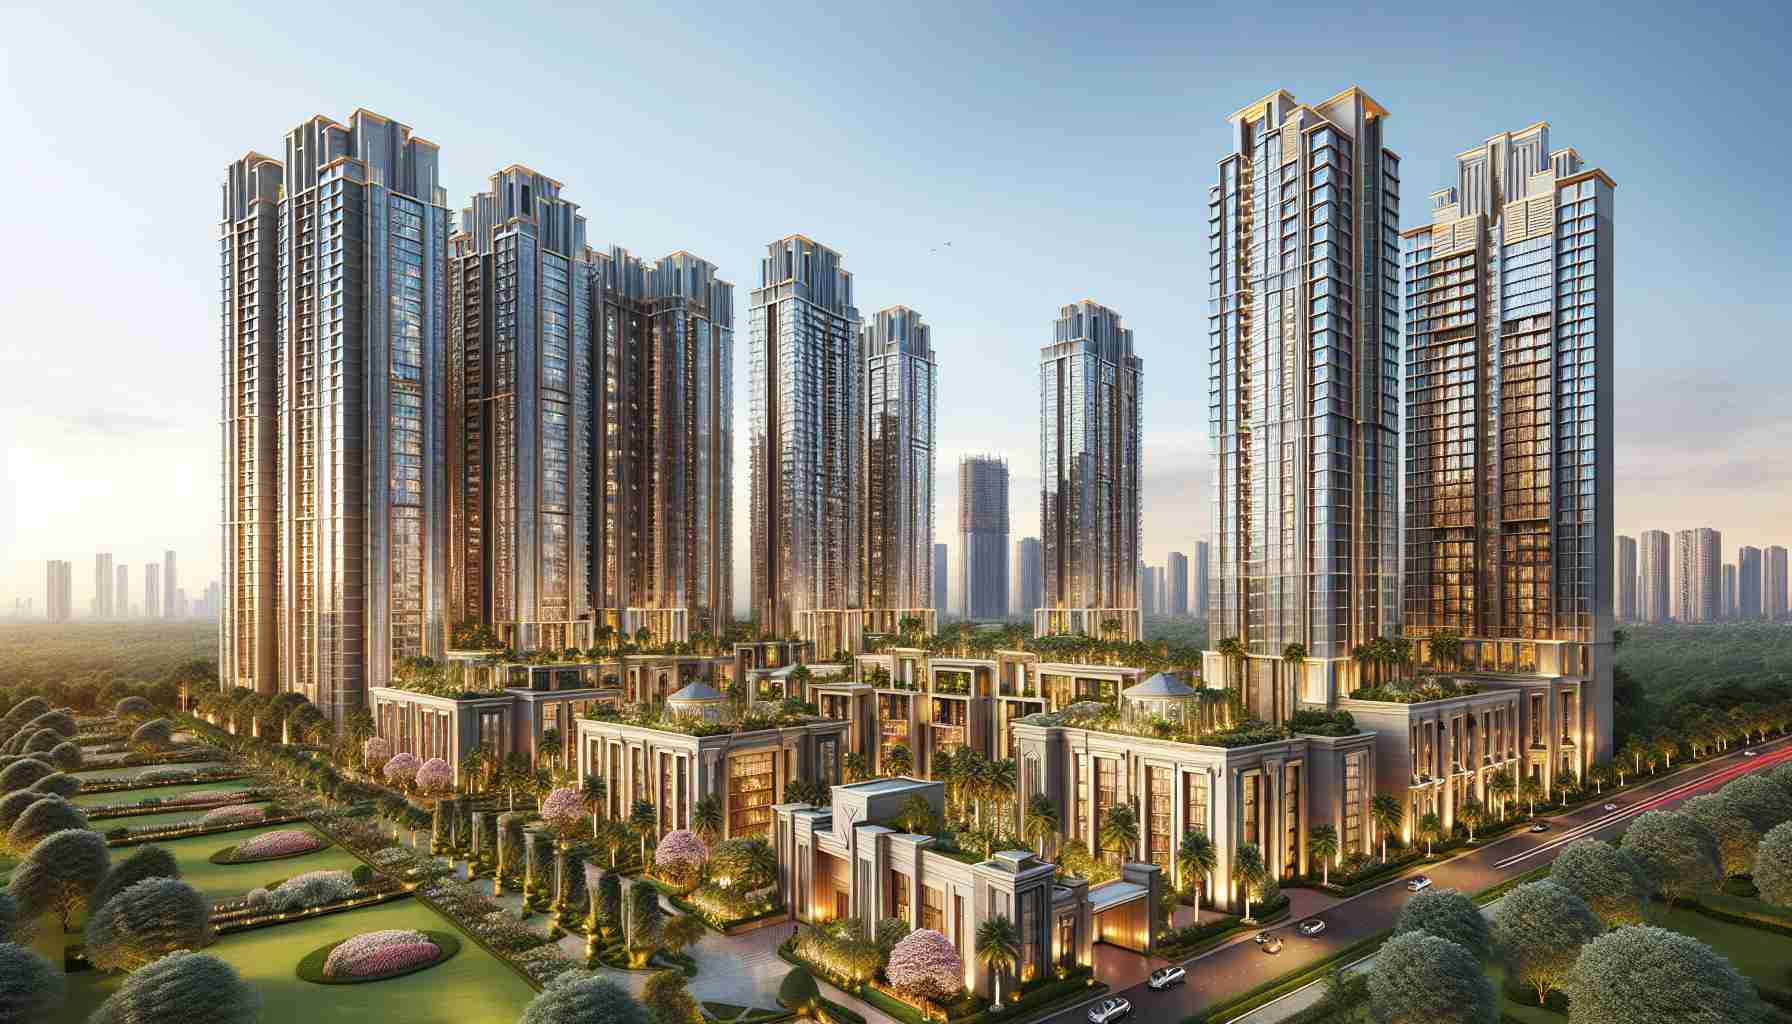 Anant Raj Ltd to Develop Luxury Housing Project in Gurugram With a Revenue Potential of ₹1800 Crore